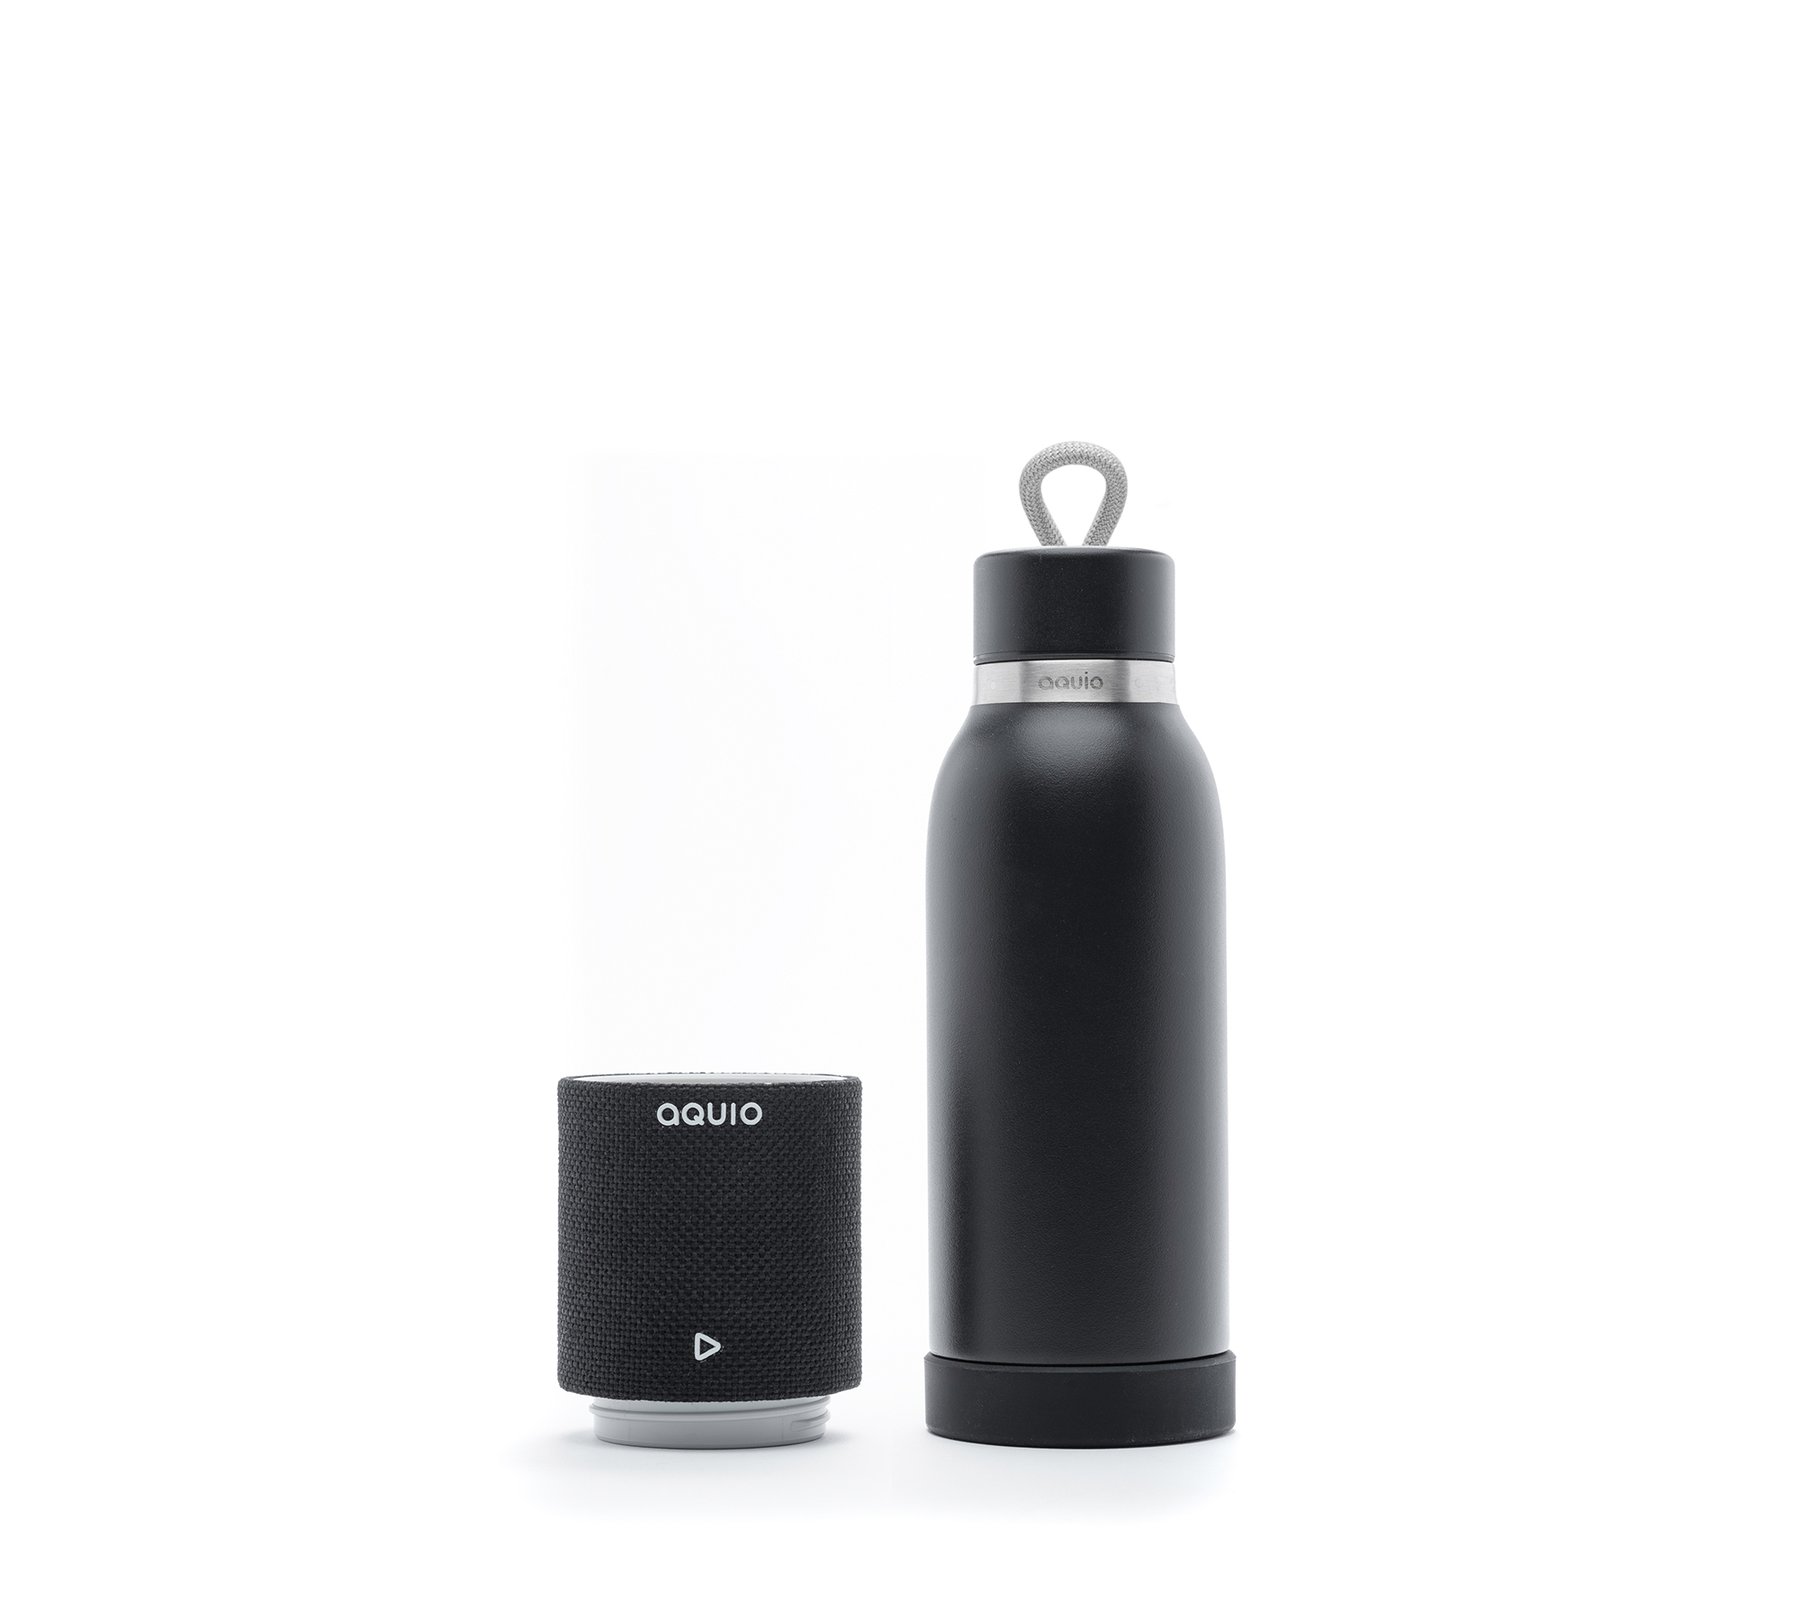 Double Wall Insulated Stainless Steel Bottle Removable Waterproof Bluetooth Speaker